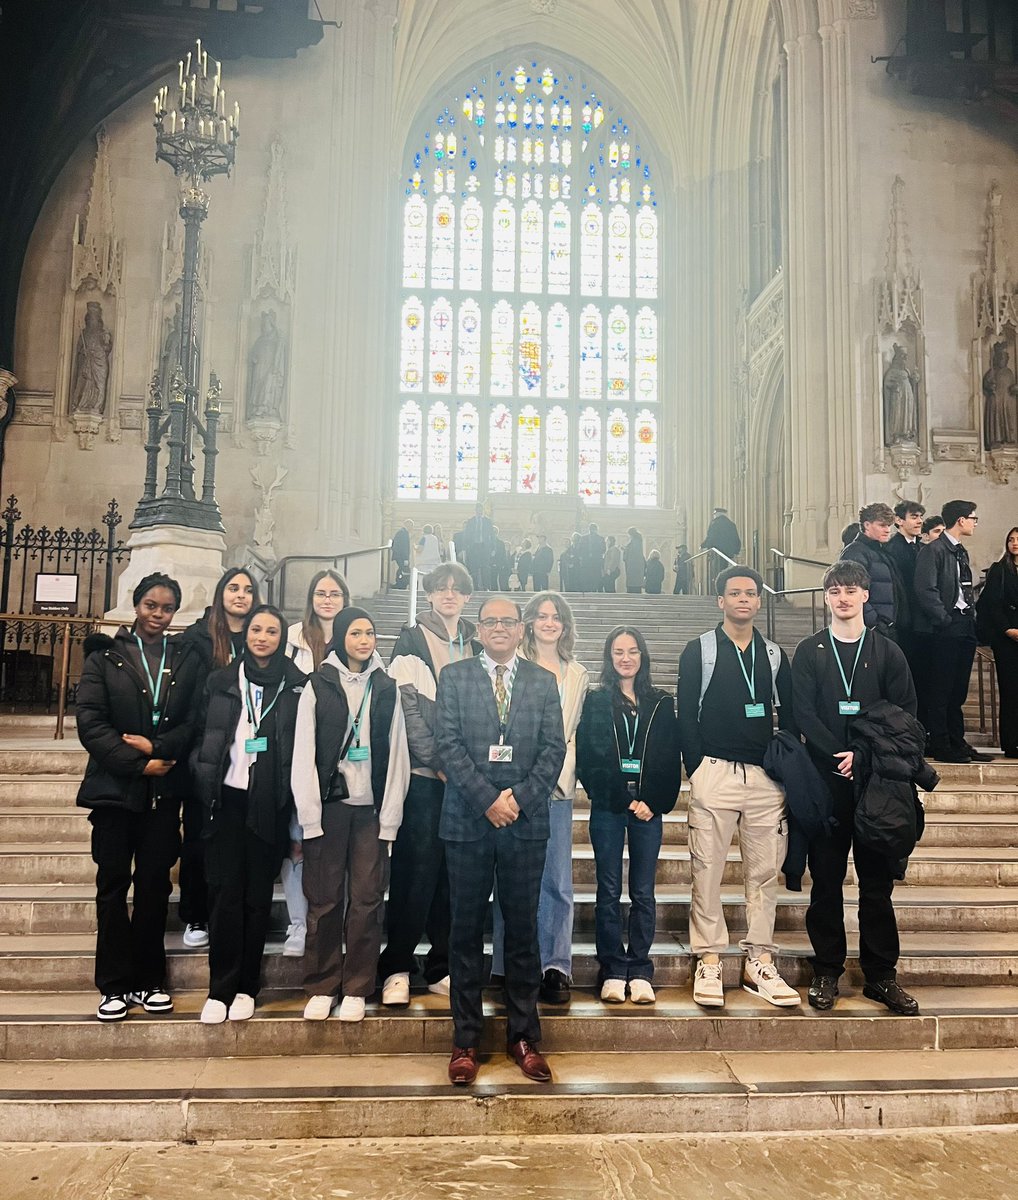 An amazing opportunity for our year 13s yesterday! We took a trip to parliament looking into the history behind the UK and meeting our MP for Bedford @YasinForBedford!! Had such an amazing day exploring our history and the politics of our country! @Bedford_Academy @heartacadtrust